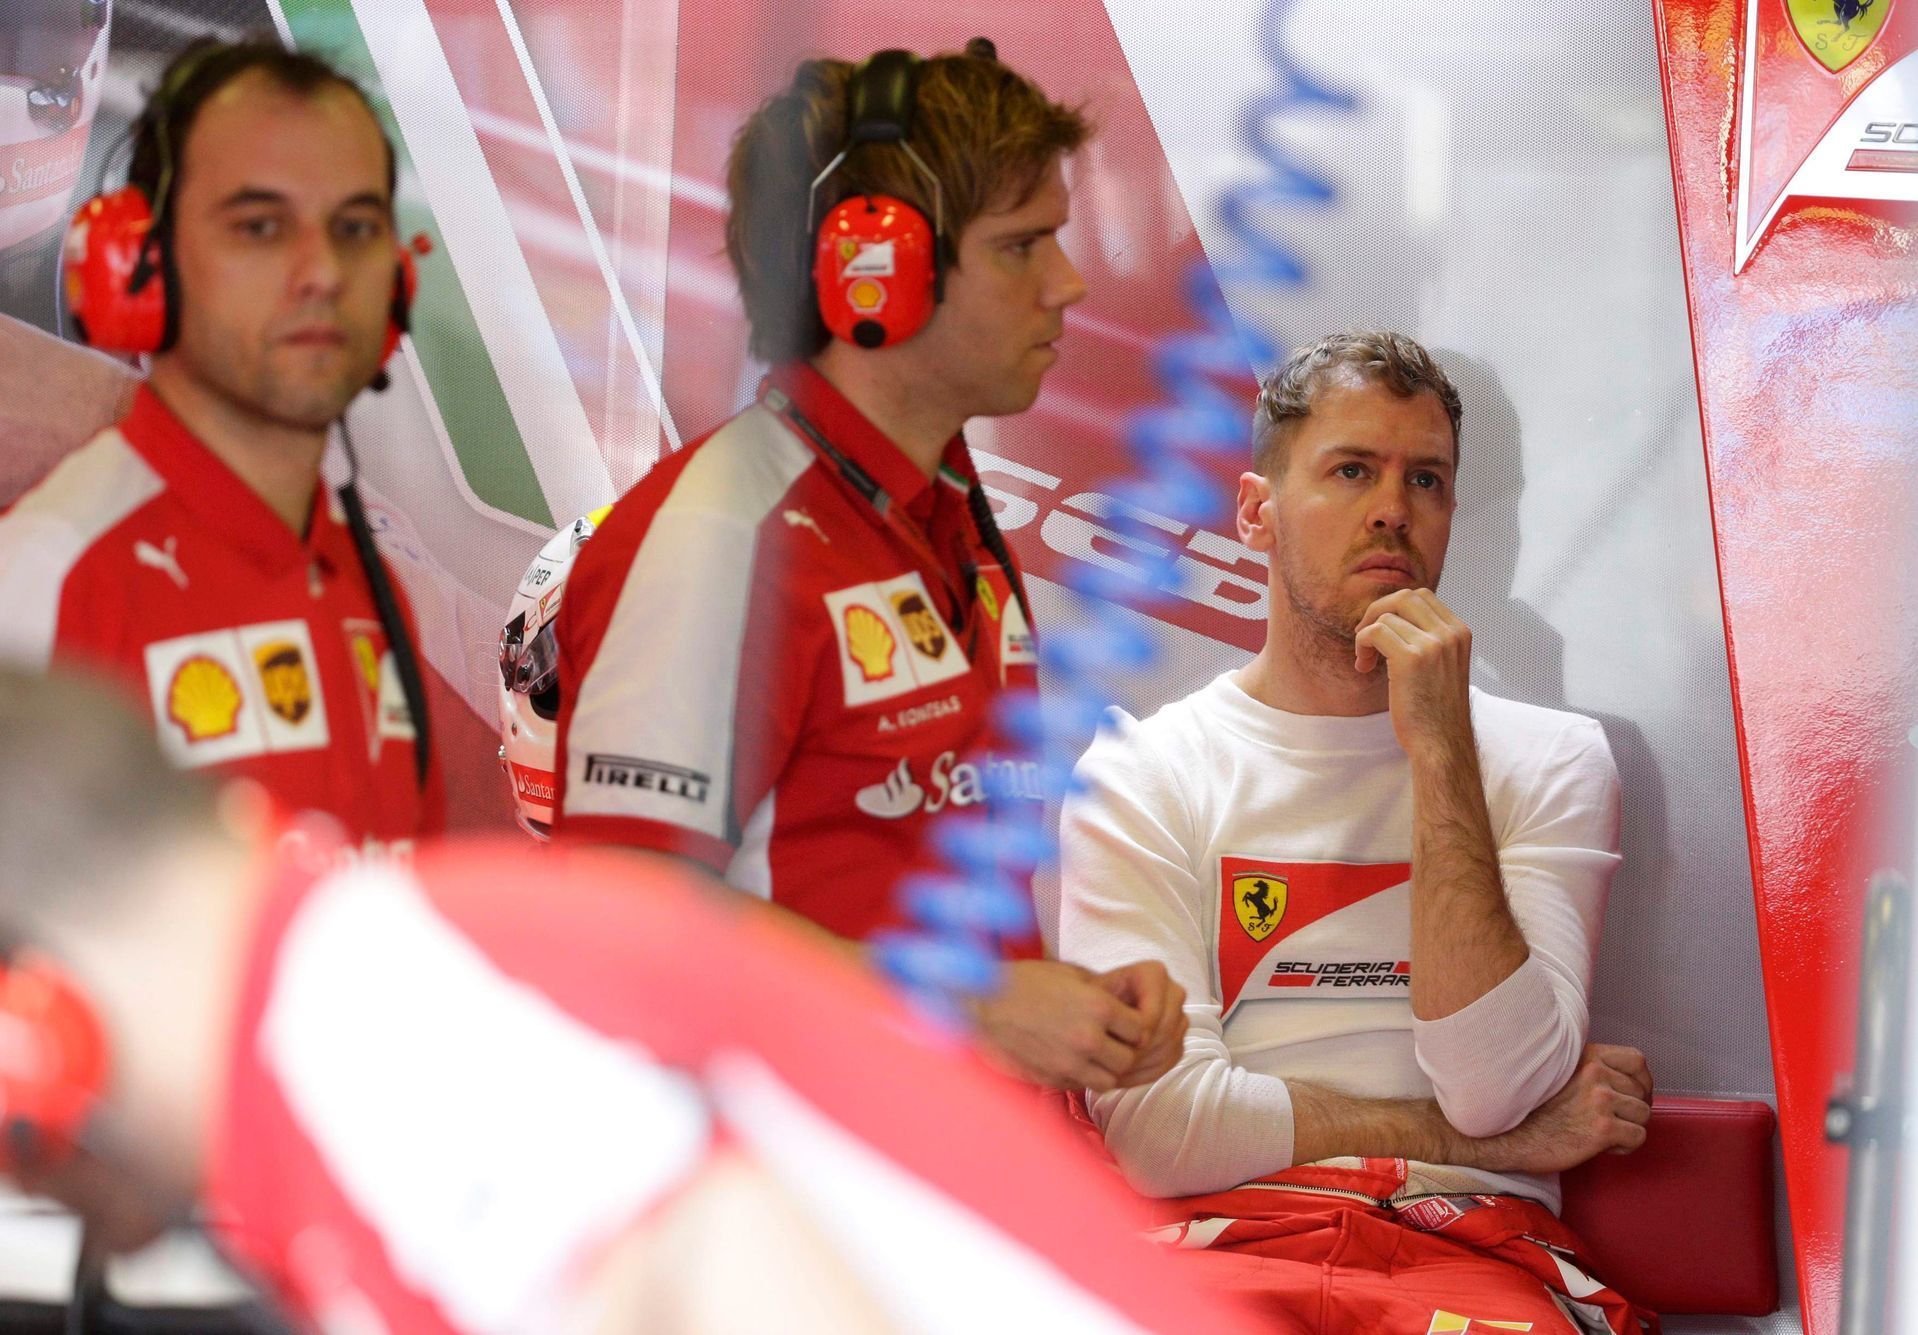 Ferrari Formula One driver Sebastian Vettel of Germany reacts in the team garage during the third practice session of the Australian F1 Grand Prix at the Albert Park circuit in Melbourne